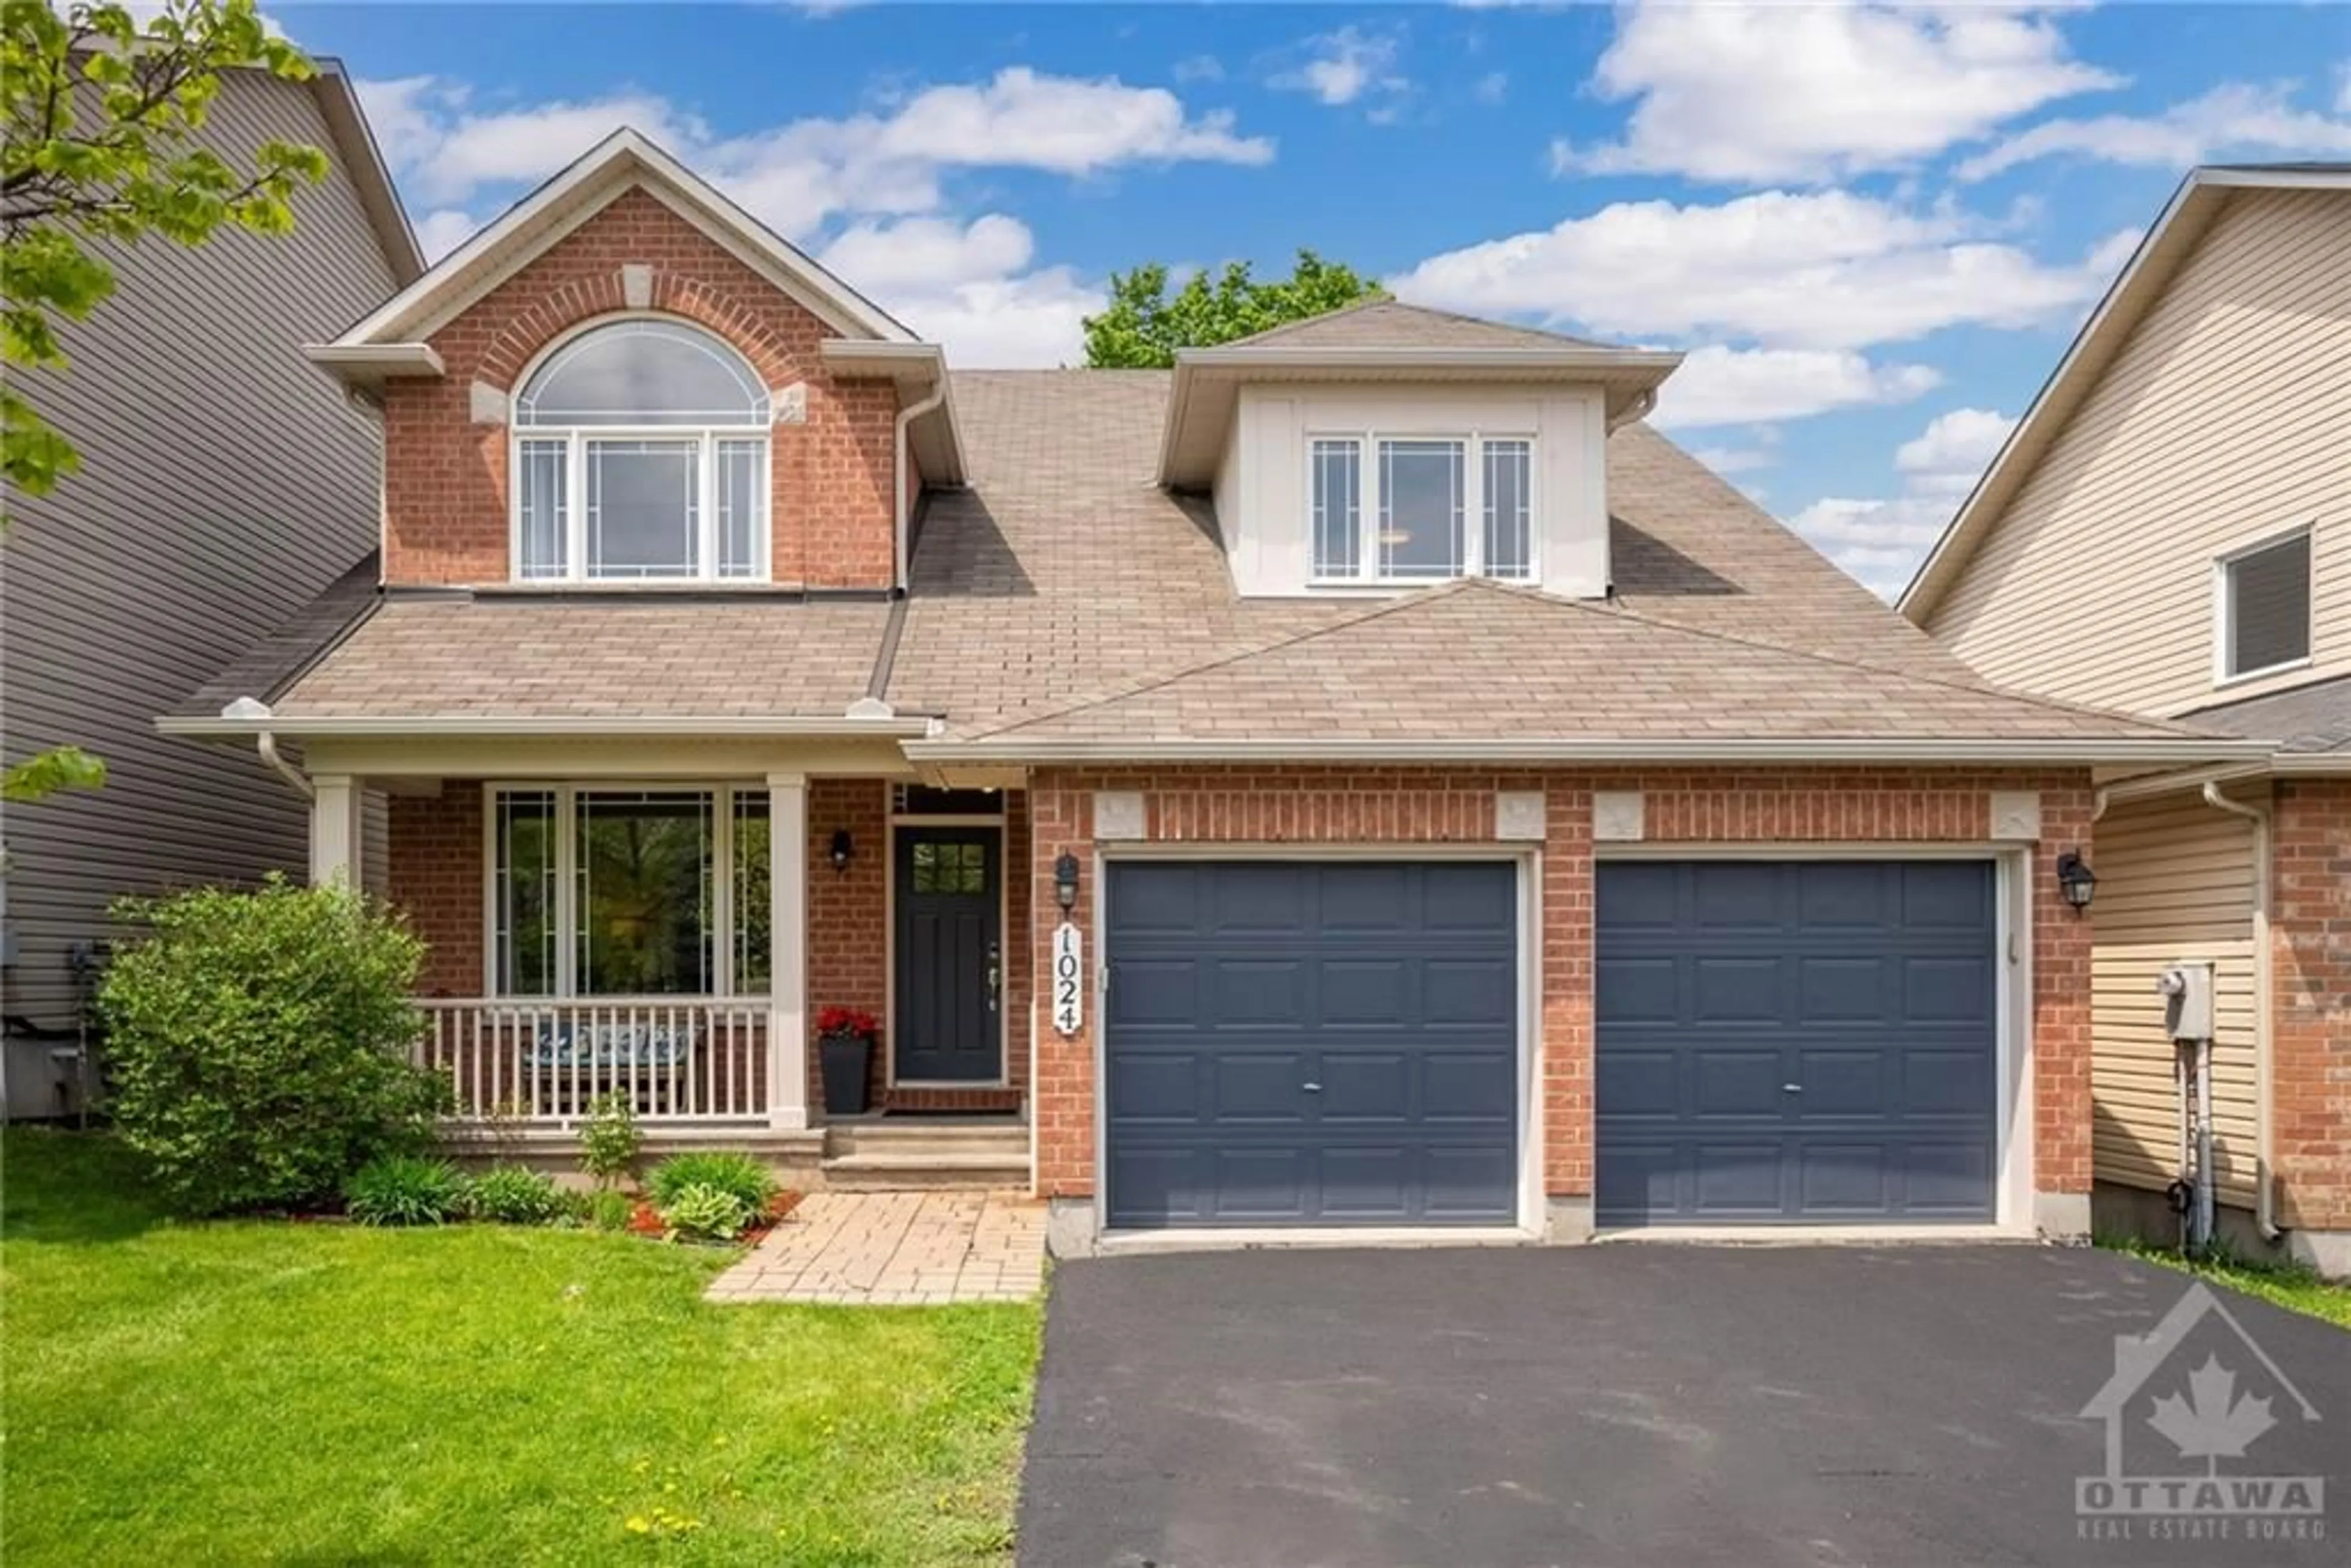 Home with brick exterior material for 1024 GOWARD Dr, Ottawa Ontario K2W 1H7